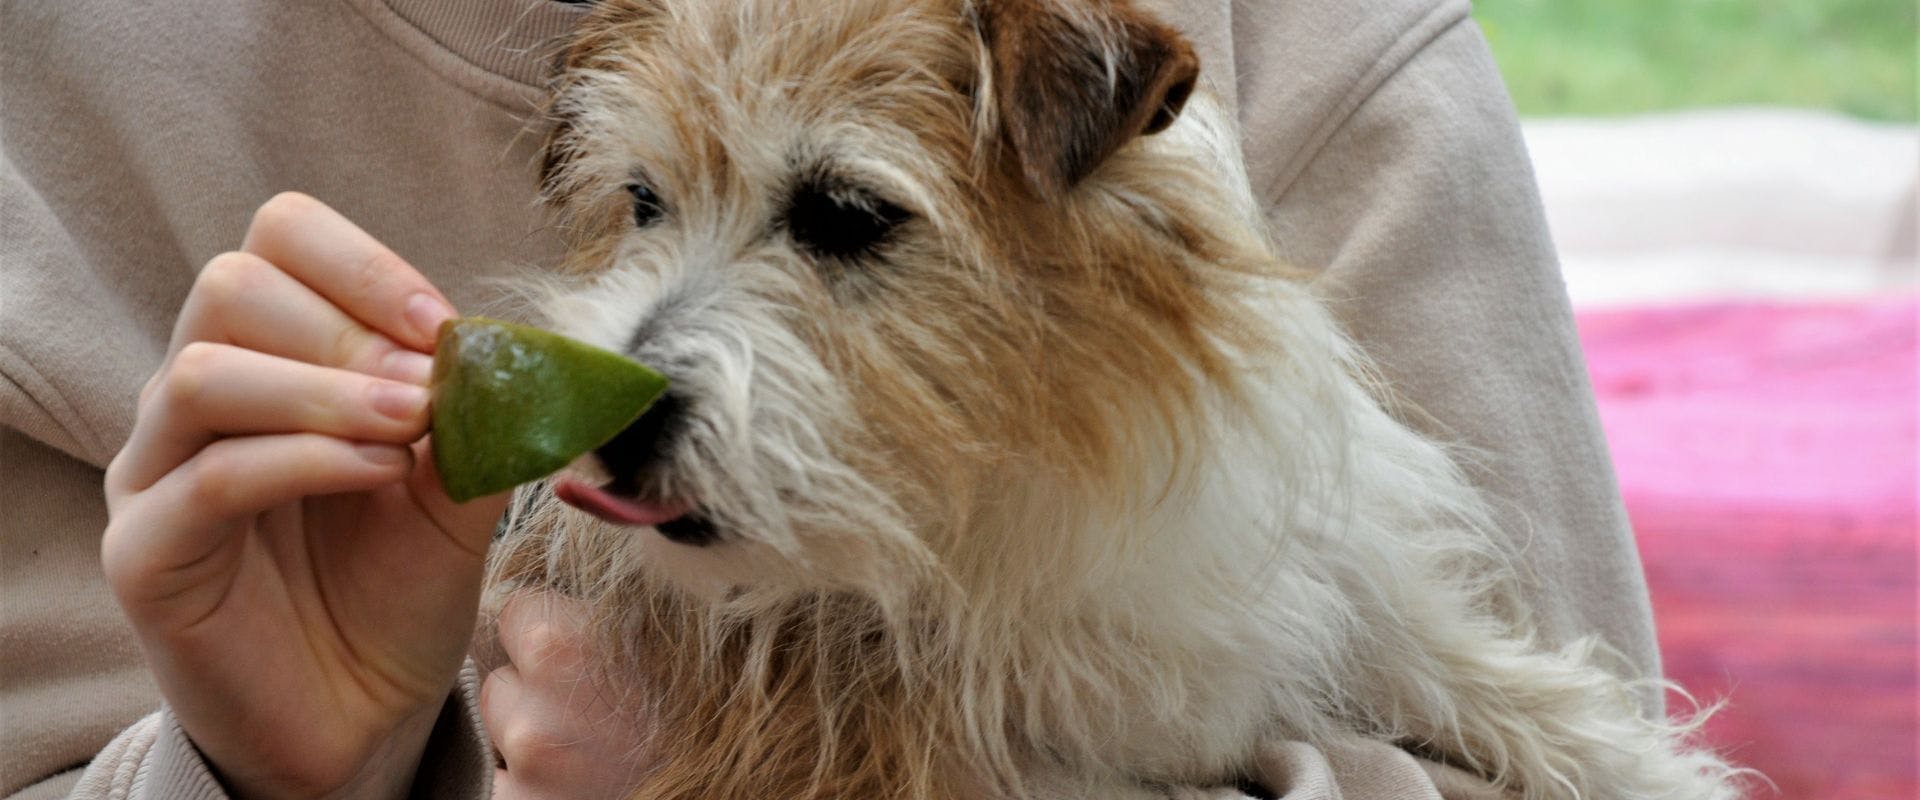 Small wire-haired dog eating mango